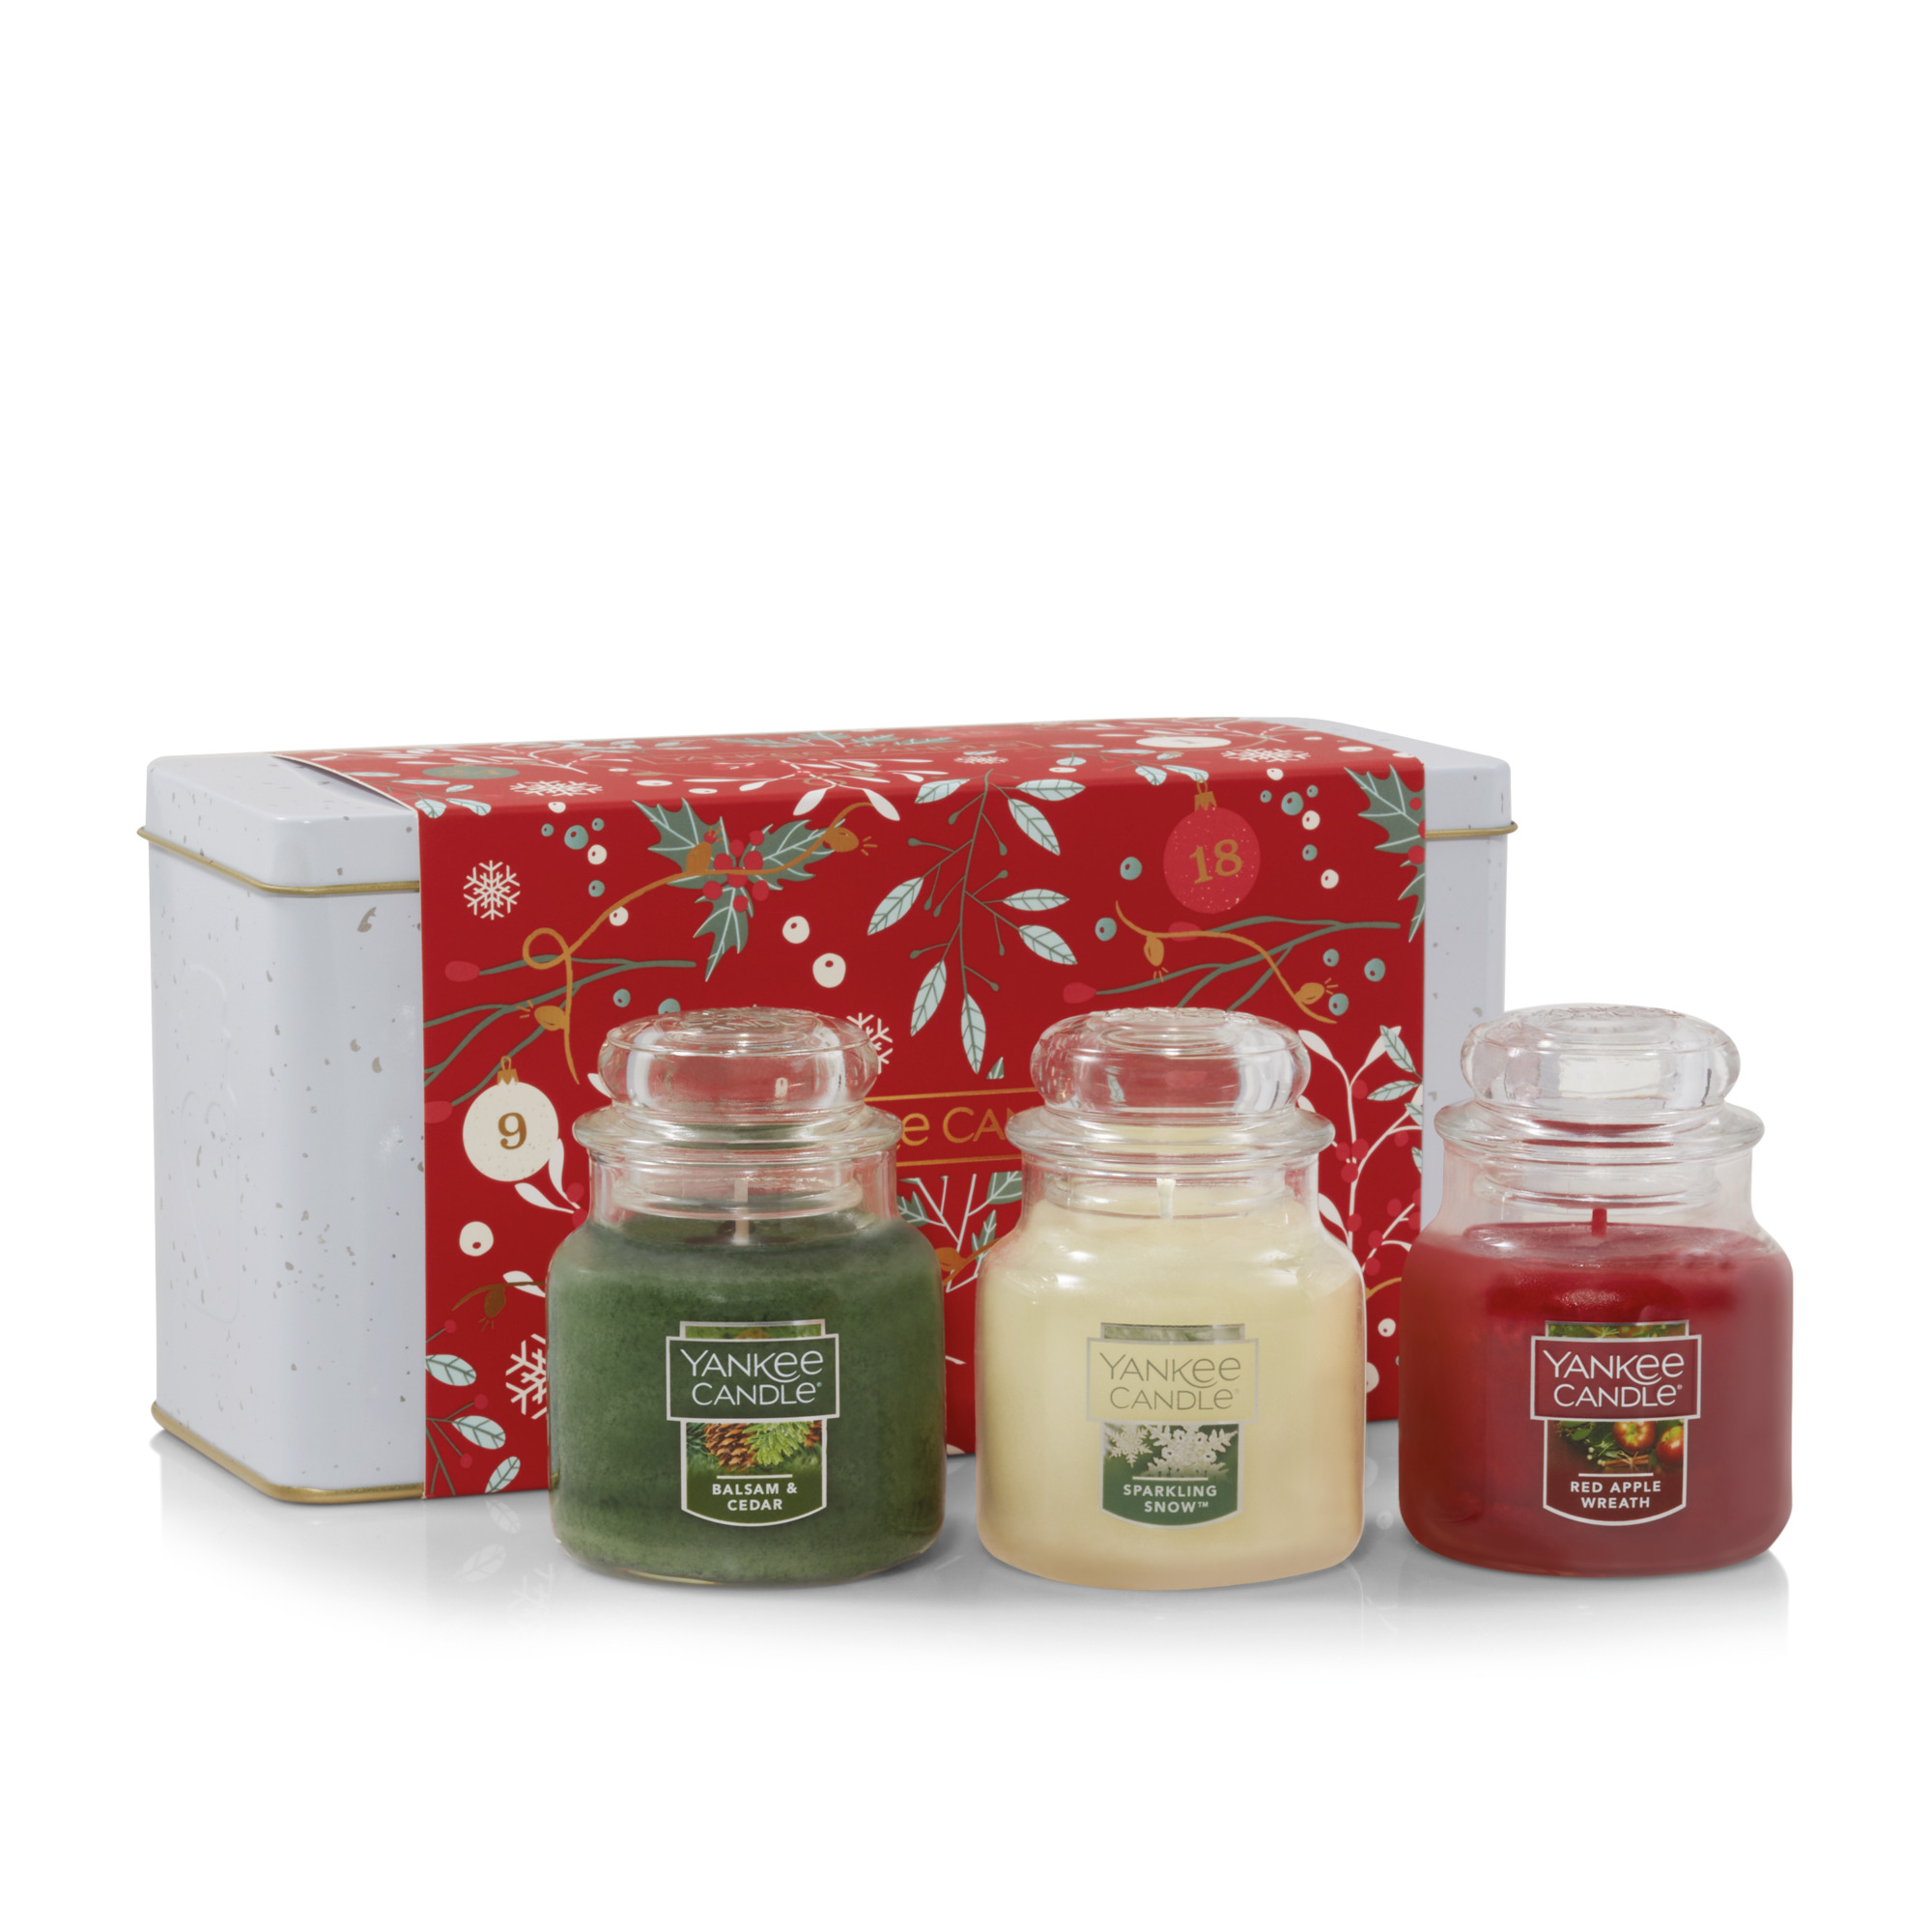 3-Candle Yankee Candle Small Jar Holiday Gift Set $12 + Free Shipping w/ Walmart+ or $35+